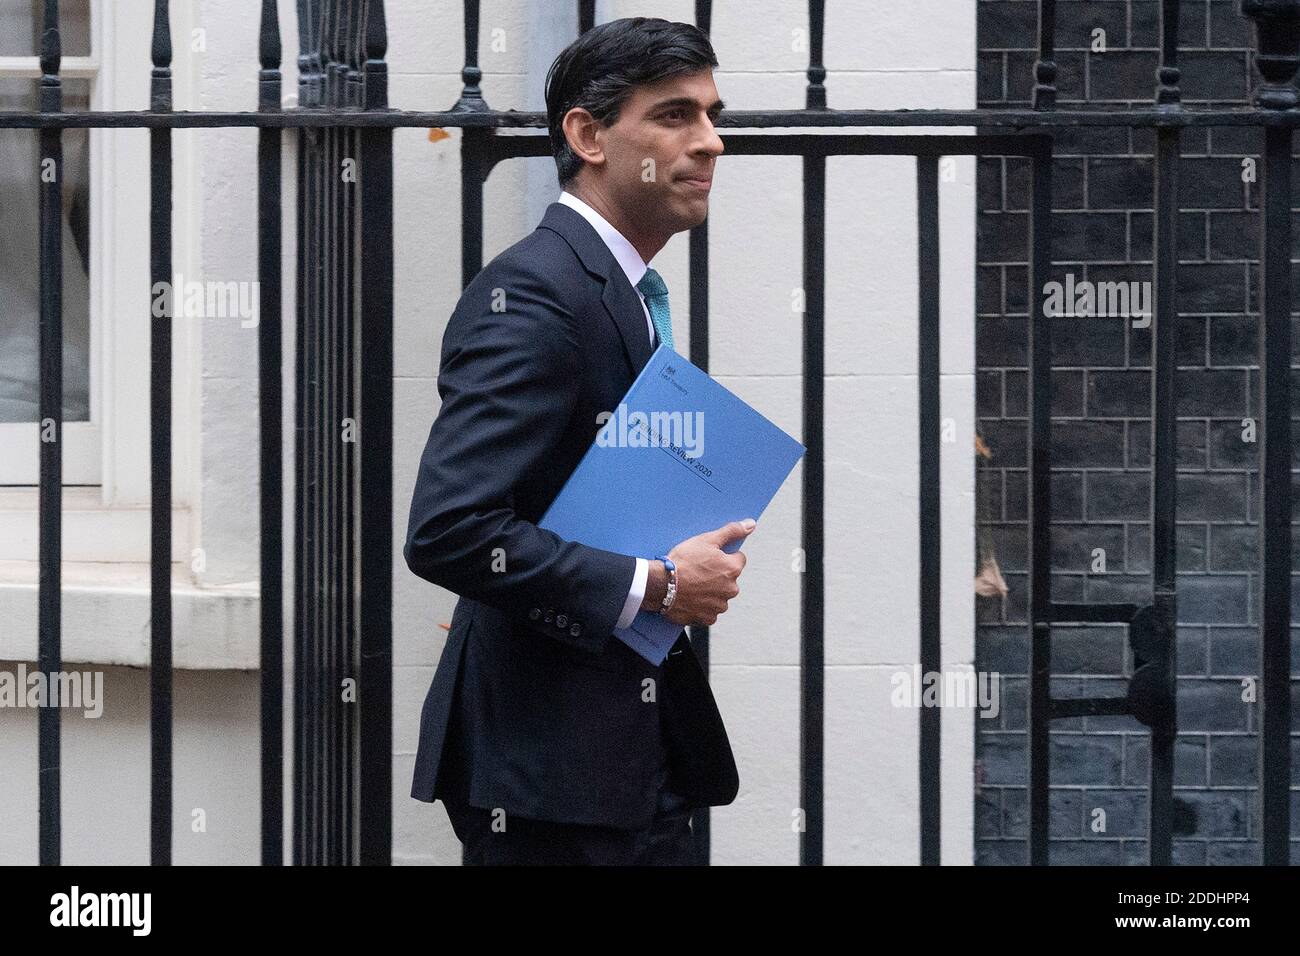 London, UK. 25th Nov, 2020. British Chancellor of the Exchequer Rishi Sunak leaves 11 Downing Street to unveil the Spending Review in London, Britain, on Nov. 25, 2020. The British economy is forecast to shrink by 11.3 percent this year, the worst recession in more than 300 years in the country as a result of the coronavirus crisis, Rishi Sunak said Wednesday. Credit: Xinhua/Alamy Live News Stock Photo